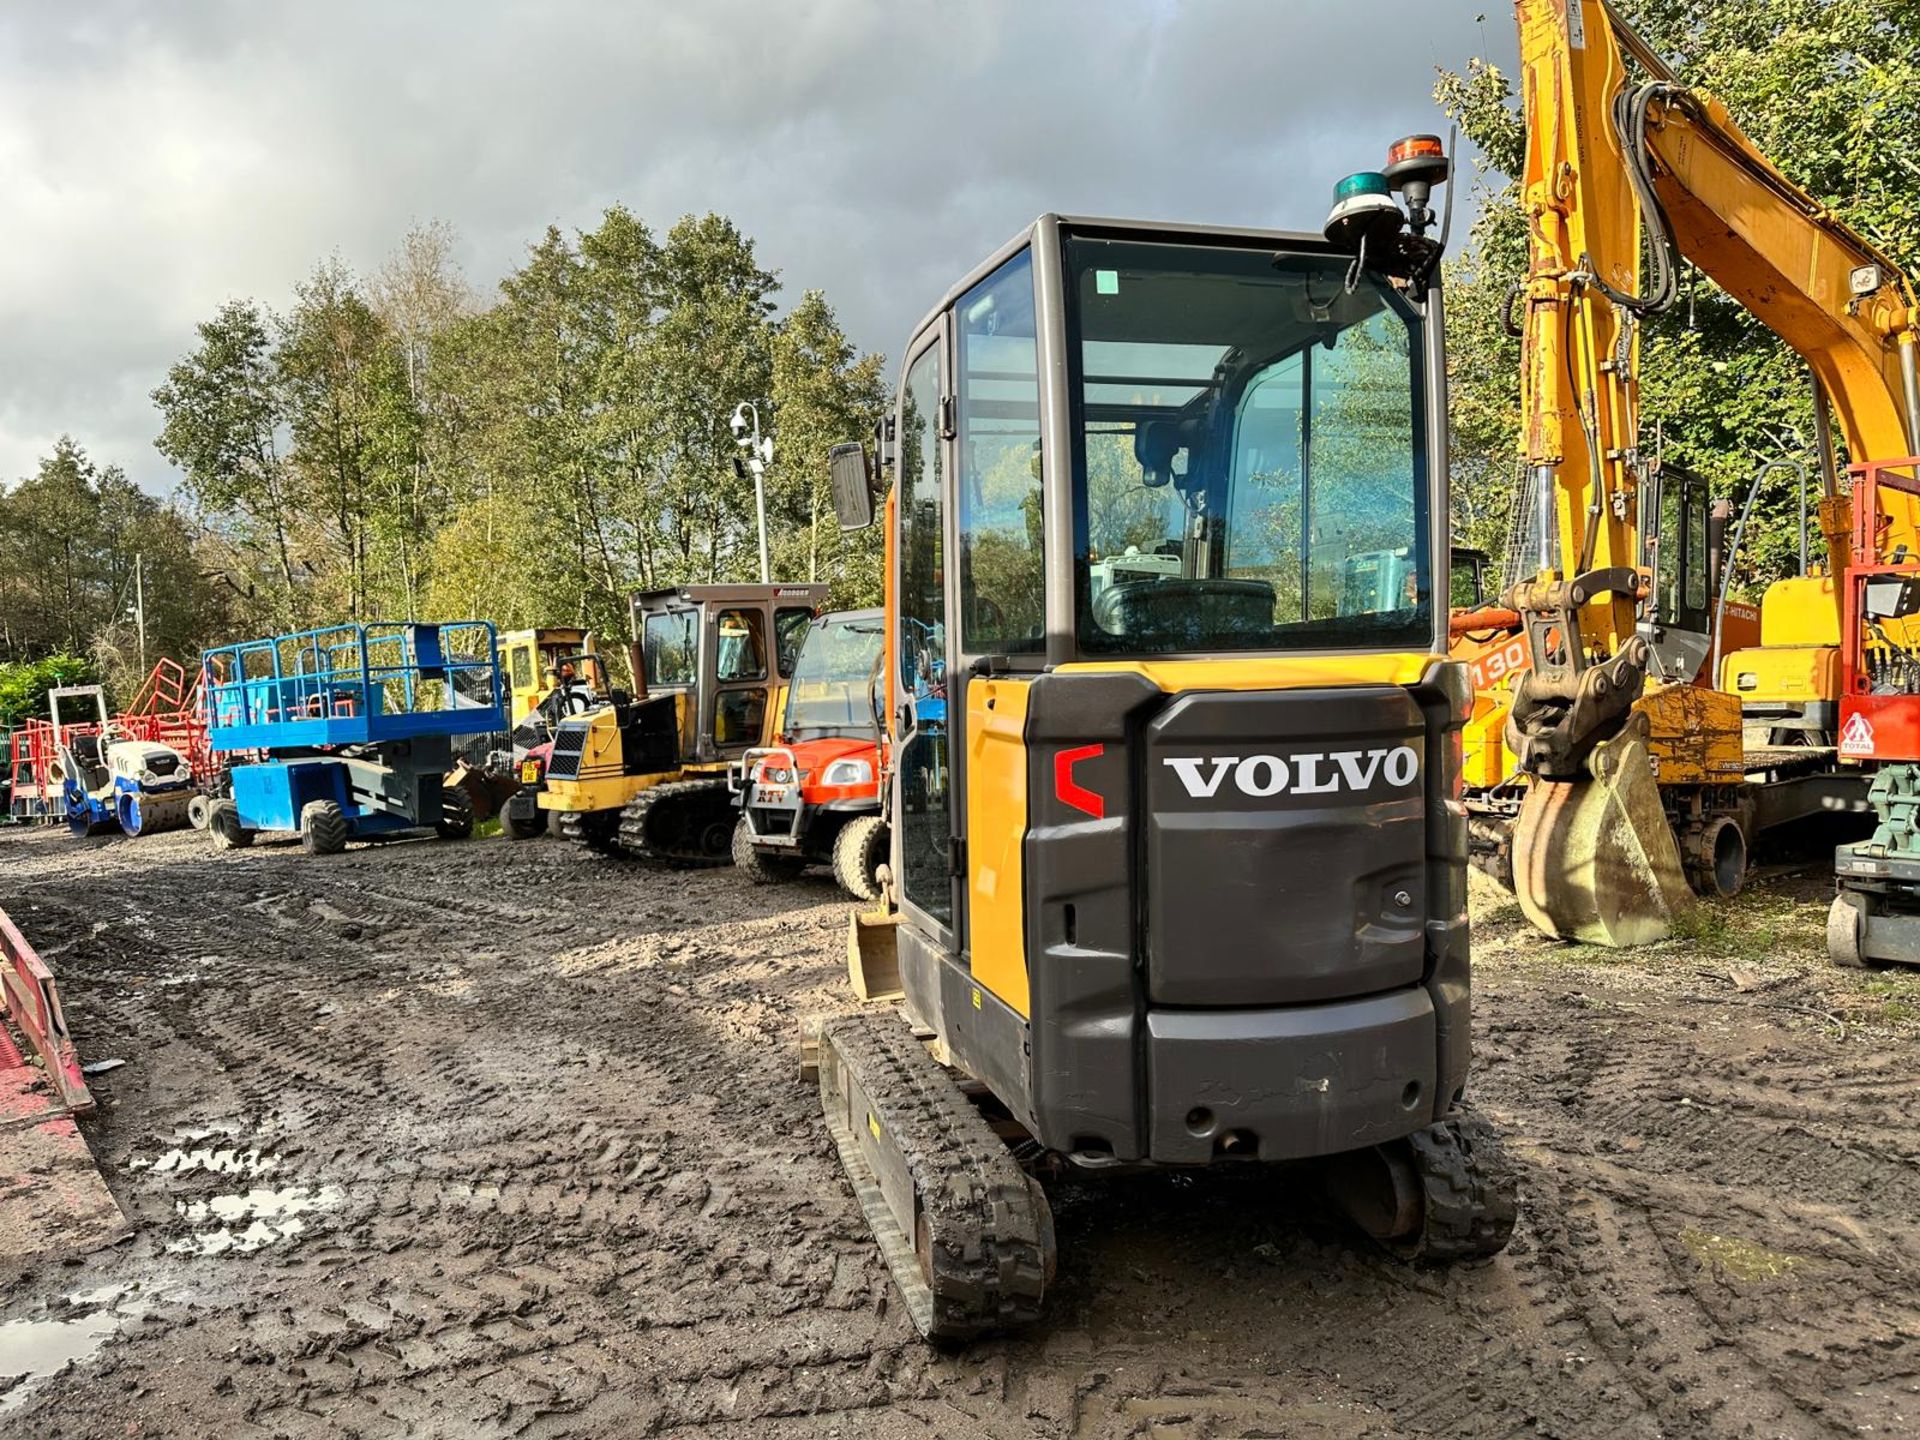 2018 VOLVO EC18E MINI EXCAVATOR - RUNS DRIVES AND WORKS WELL - SHOWING A LOW 1801 HOURS! - Bild 17 aus 21